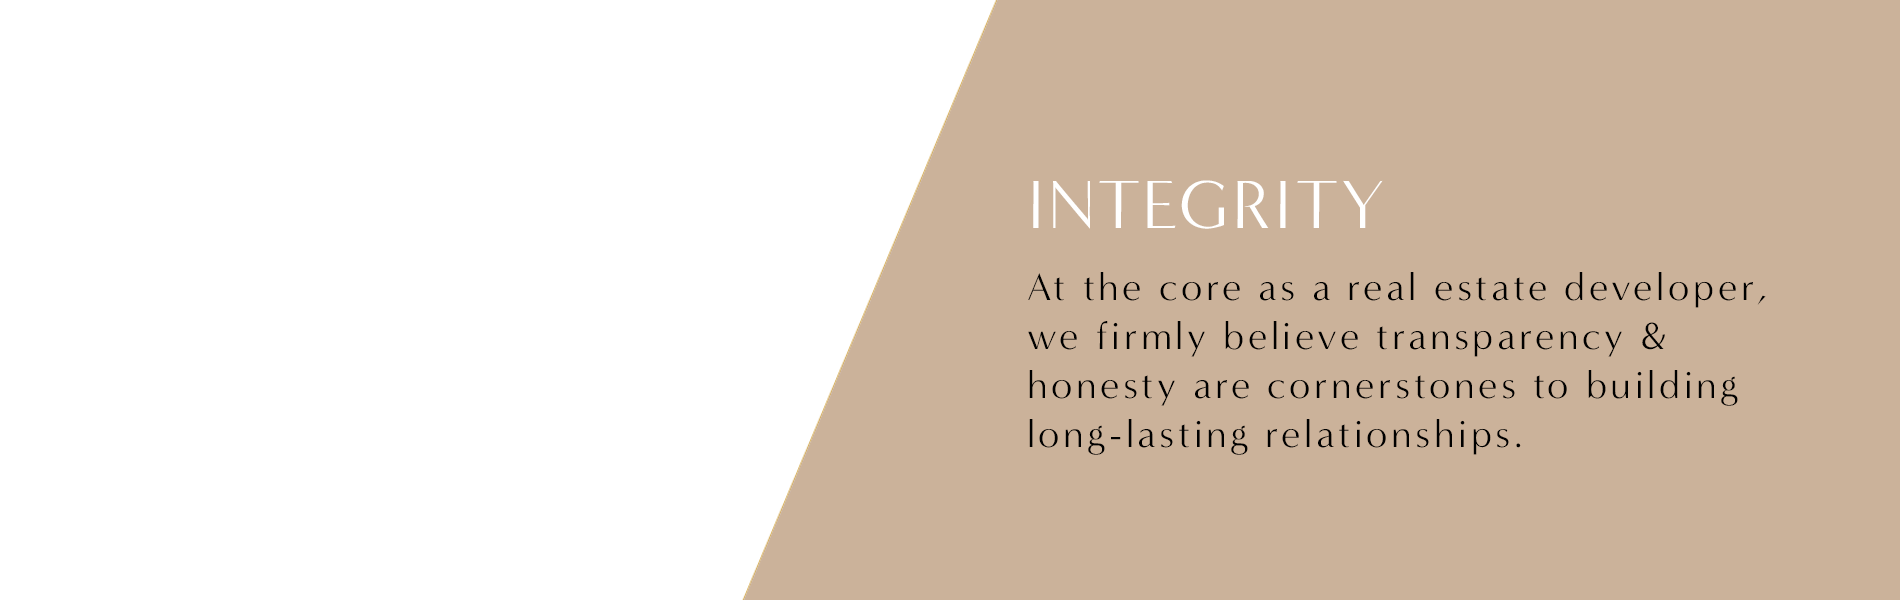 Our values slider - Integrity